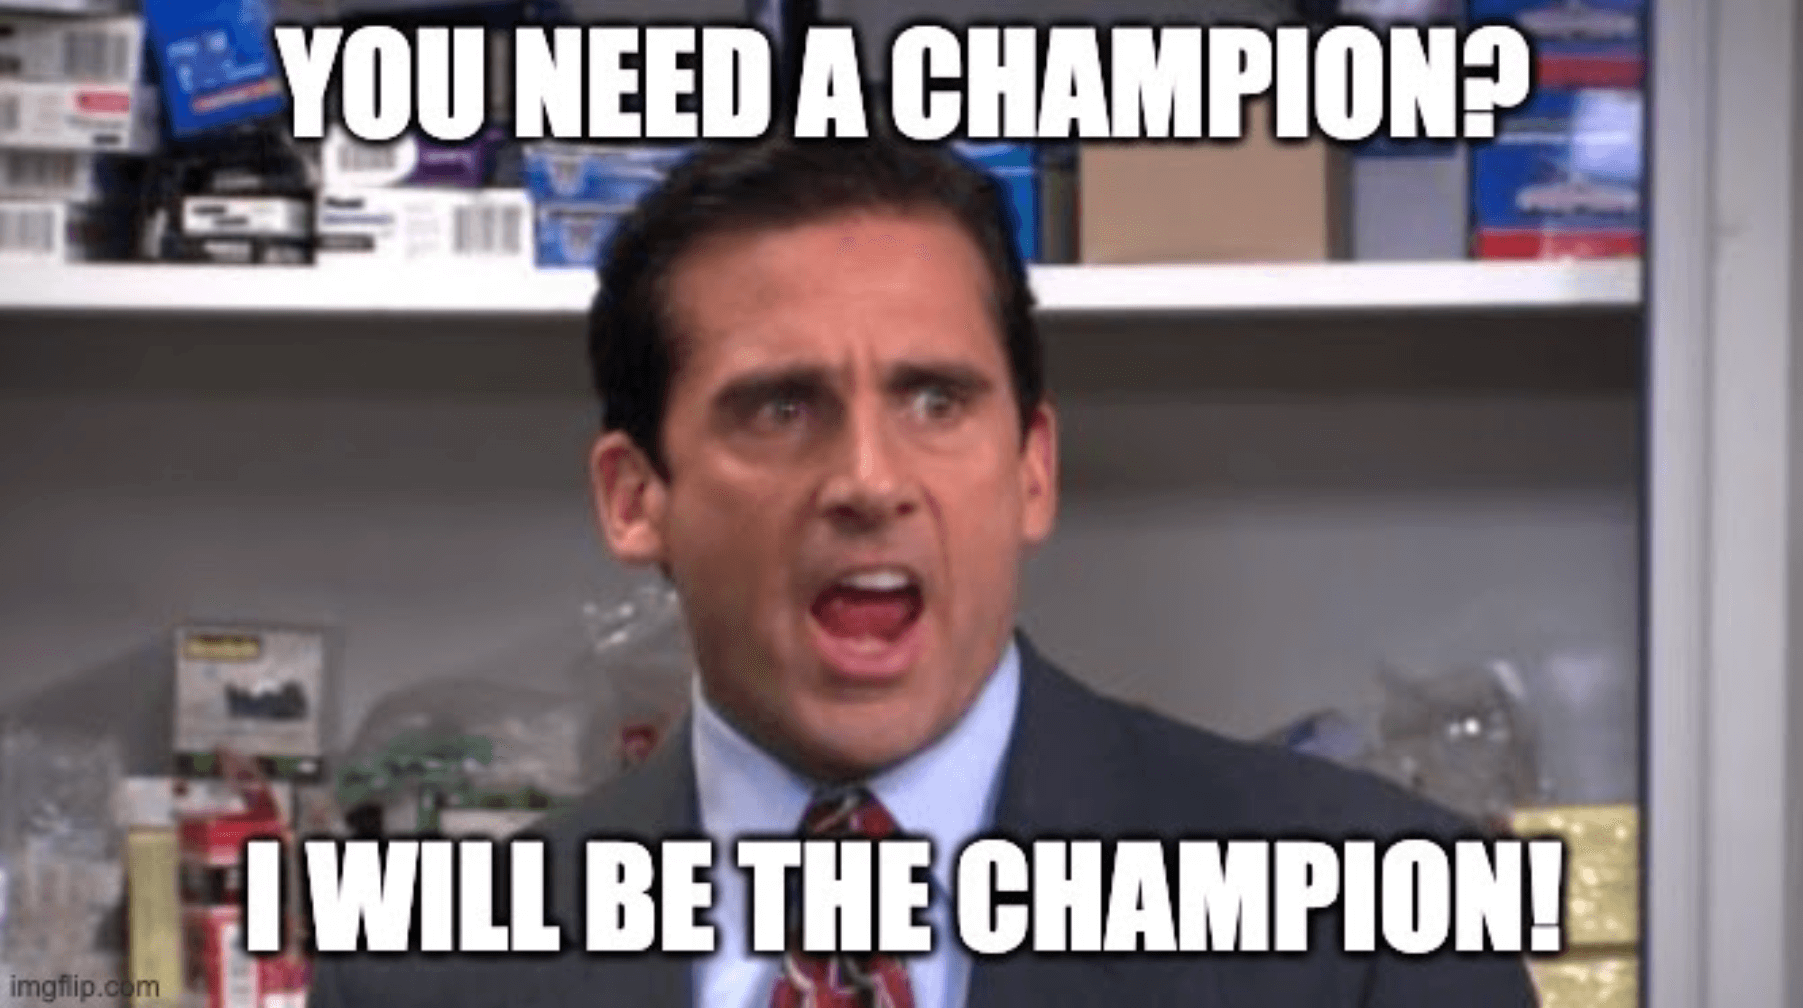 Getting a champion to lead your xf